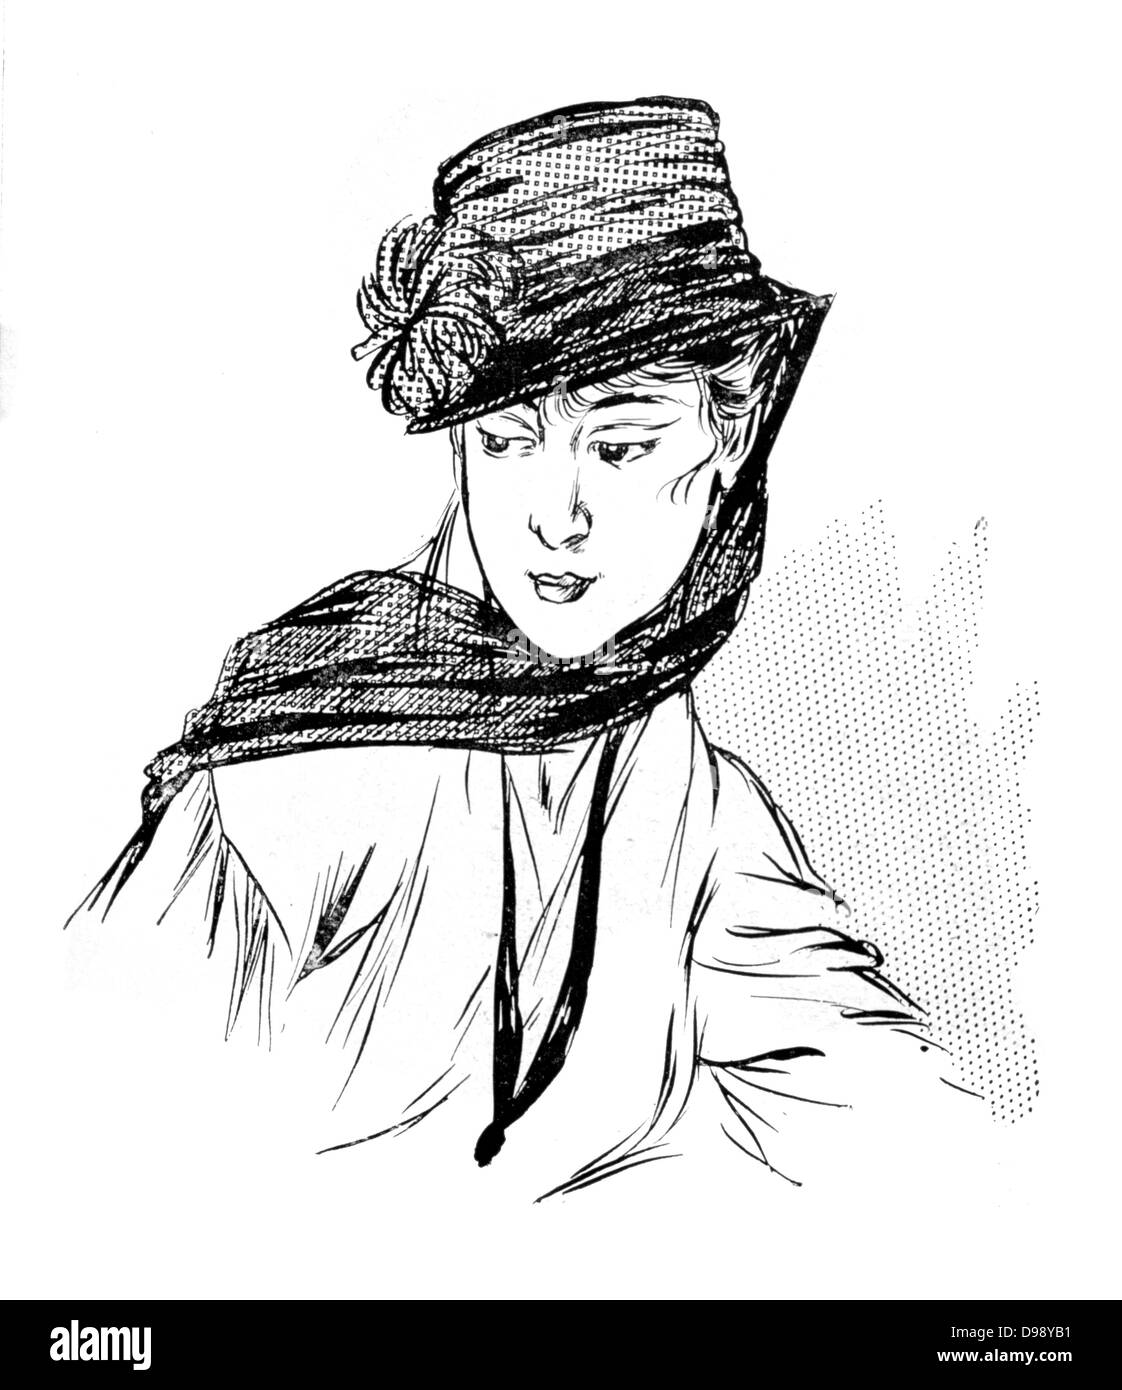 Women's fashion. Hat with veil considered suitable for mourning. From the French periodical 'Le Flambeau', 18 September 1915. Death Bereavement First World War 1914-1918. Stock Photo